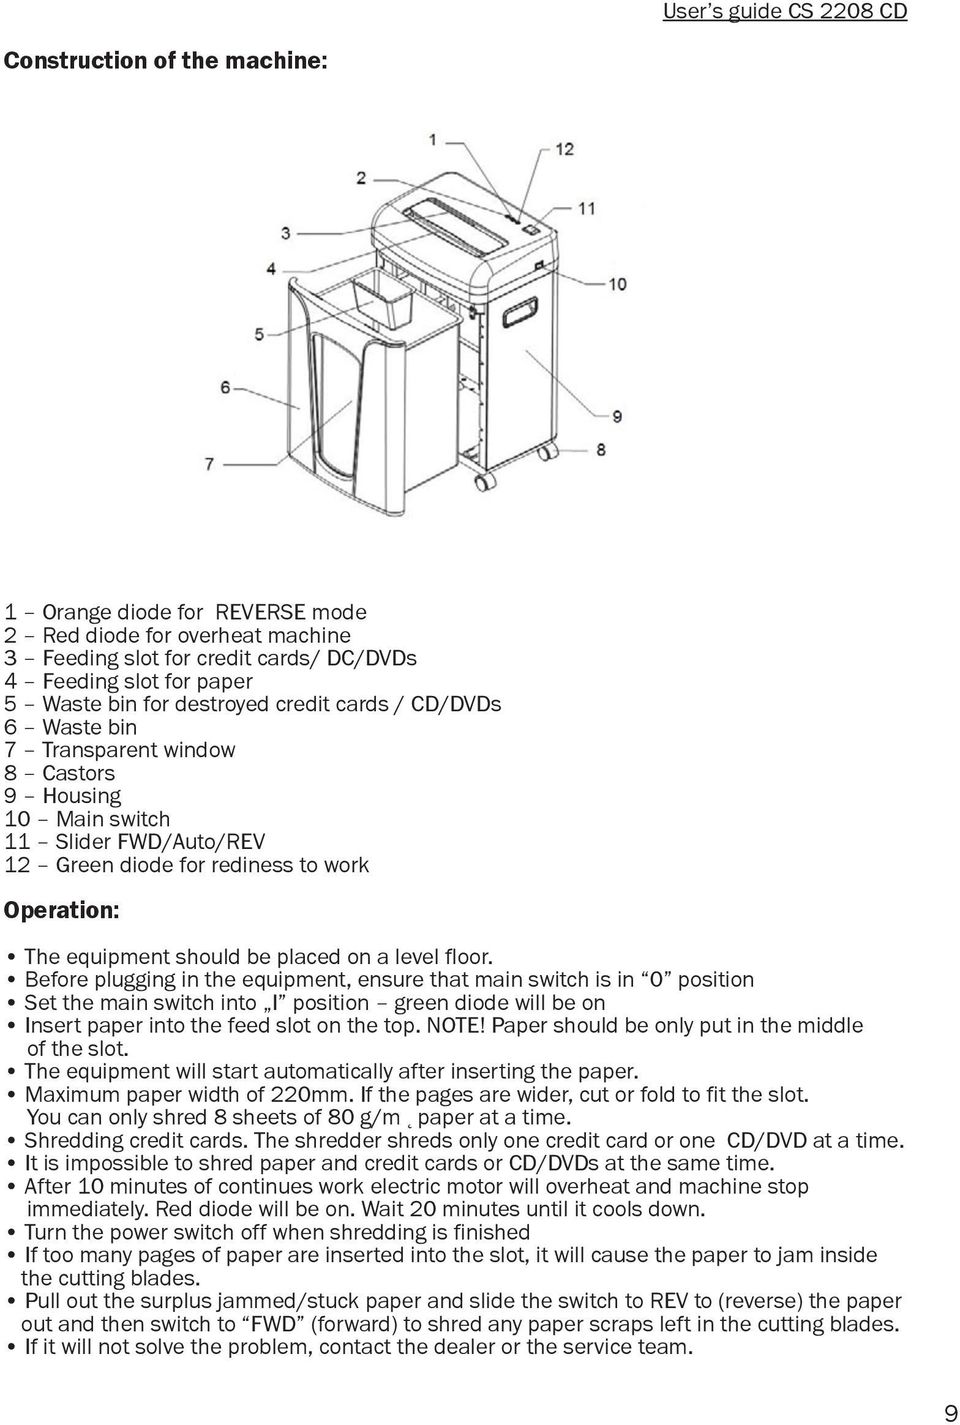 CD/DVD 5 Waste bin for destroyed credit cards / CD/DVDs 6 Waste bin 7 Transparent window 8 Castors 9 Housing 10 Main switch 11 Slider FWD/Auto/REV 12 Green diode for rediness to work Operation: